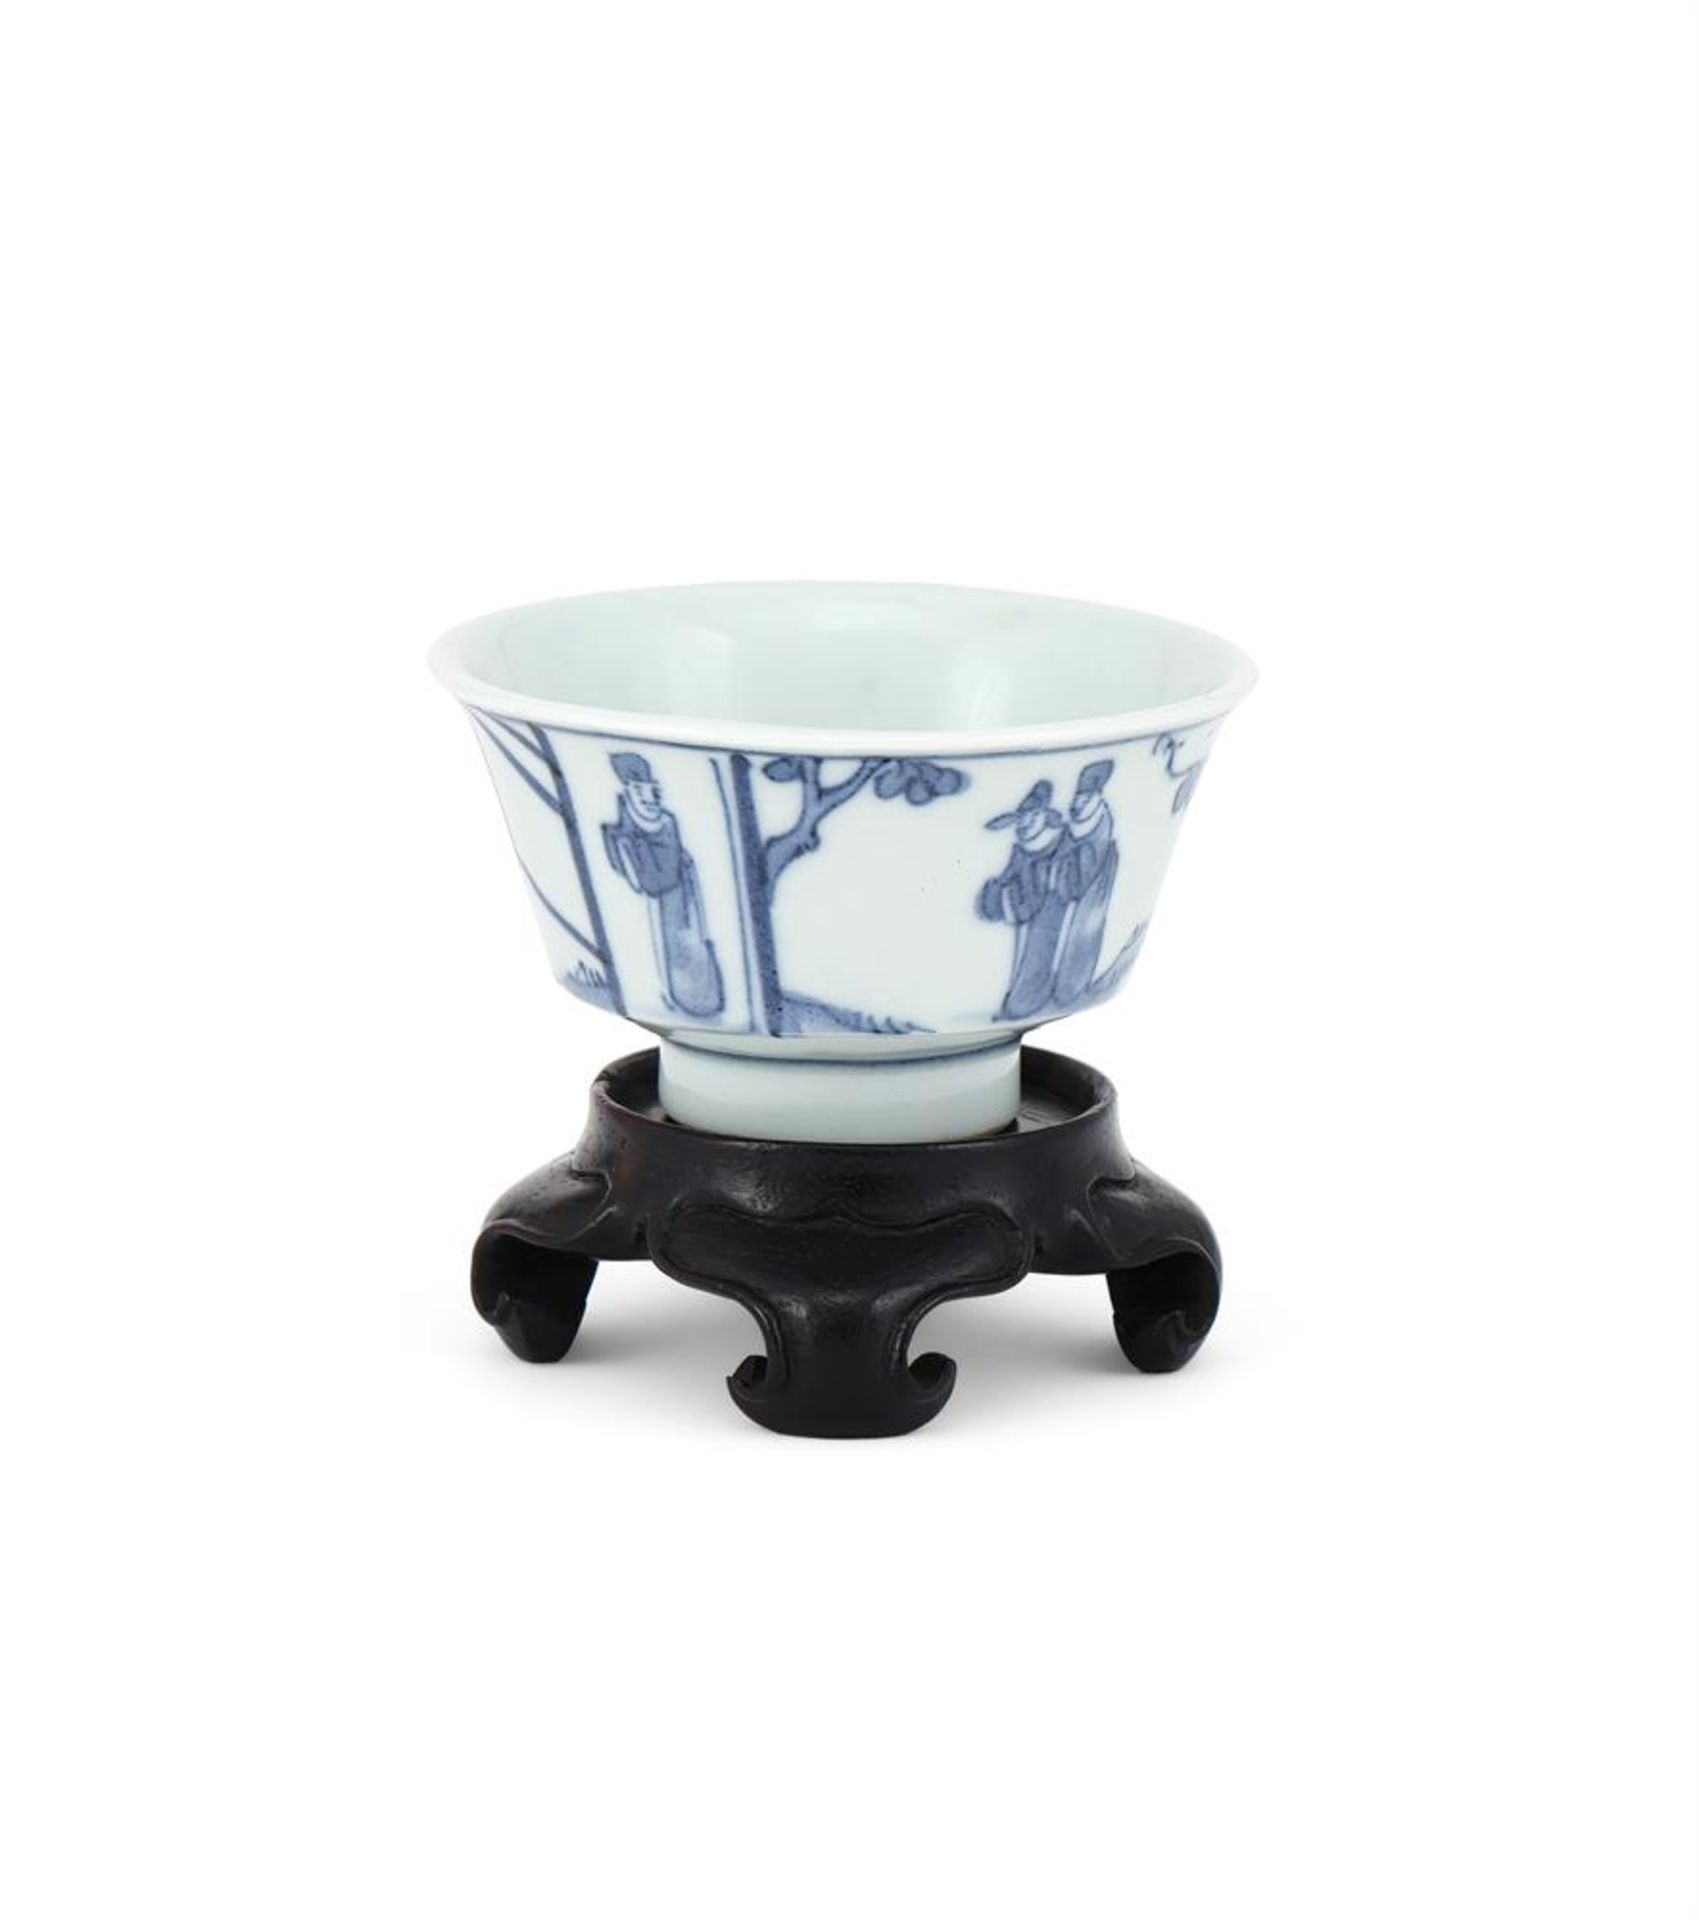 A CIRCULAR PORCELAIN BLUE AND WHITE CUP, MARK OF CHONGZHEN BUT POSSIBLY LATER